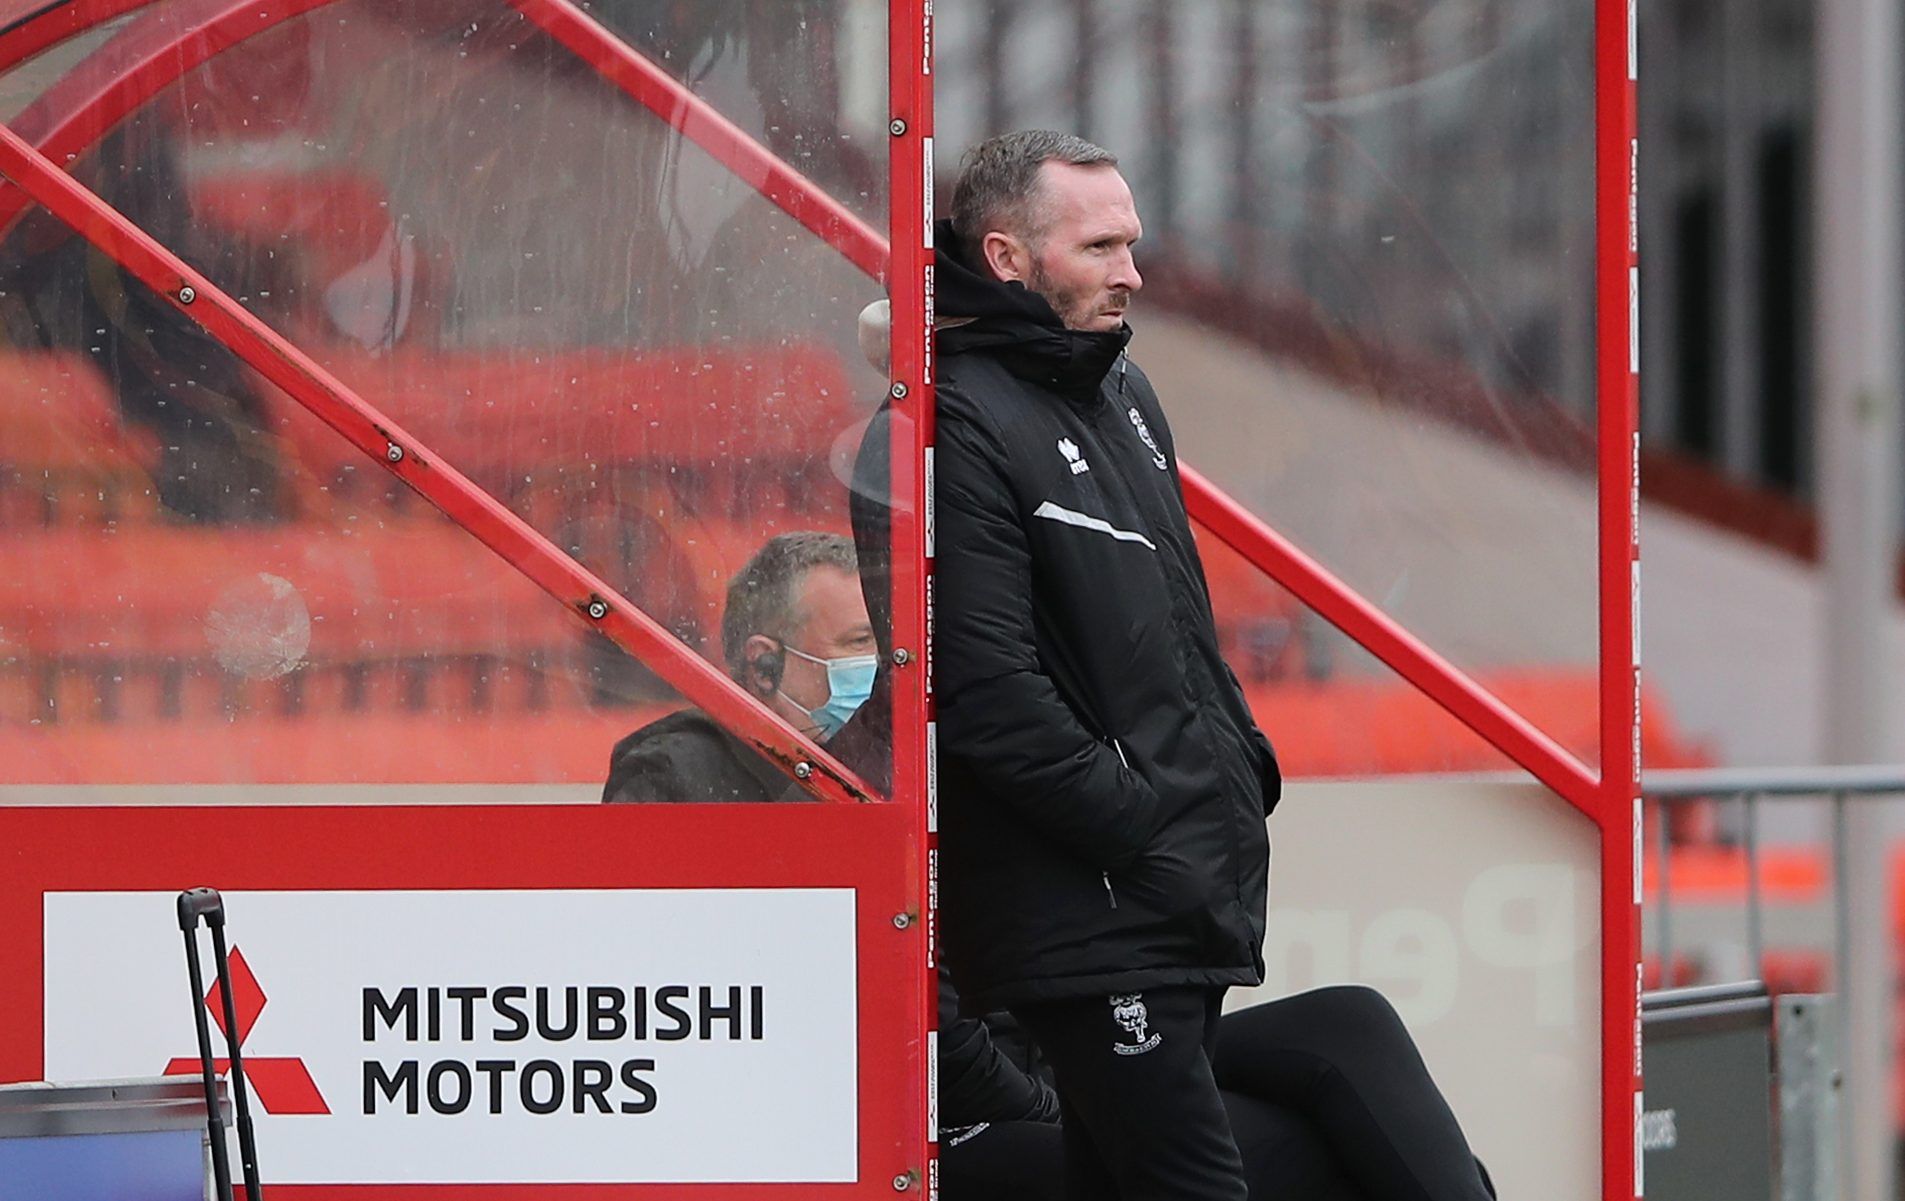 lincoln-city-manager-michael-appleton-in-the-dugout-league-one-vs-ipswich.jpg